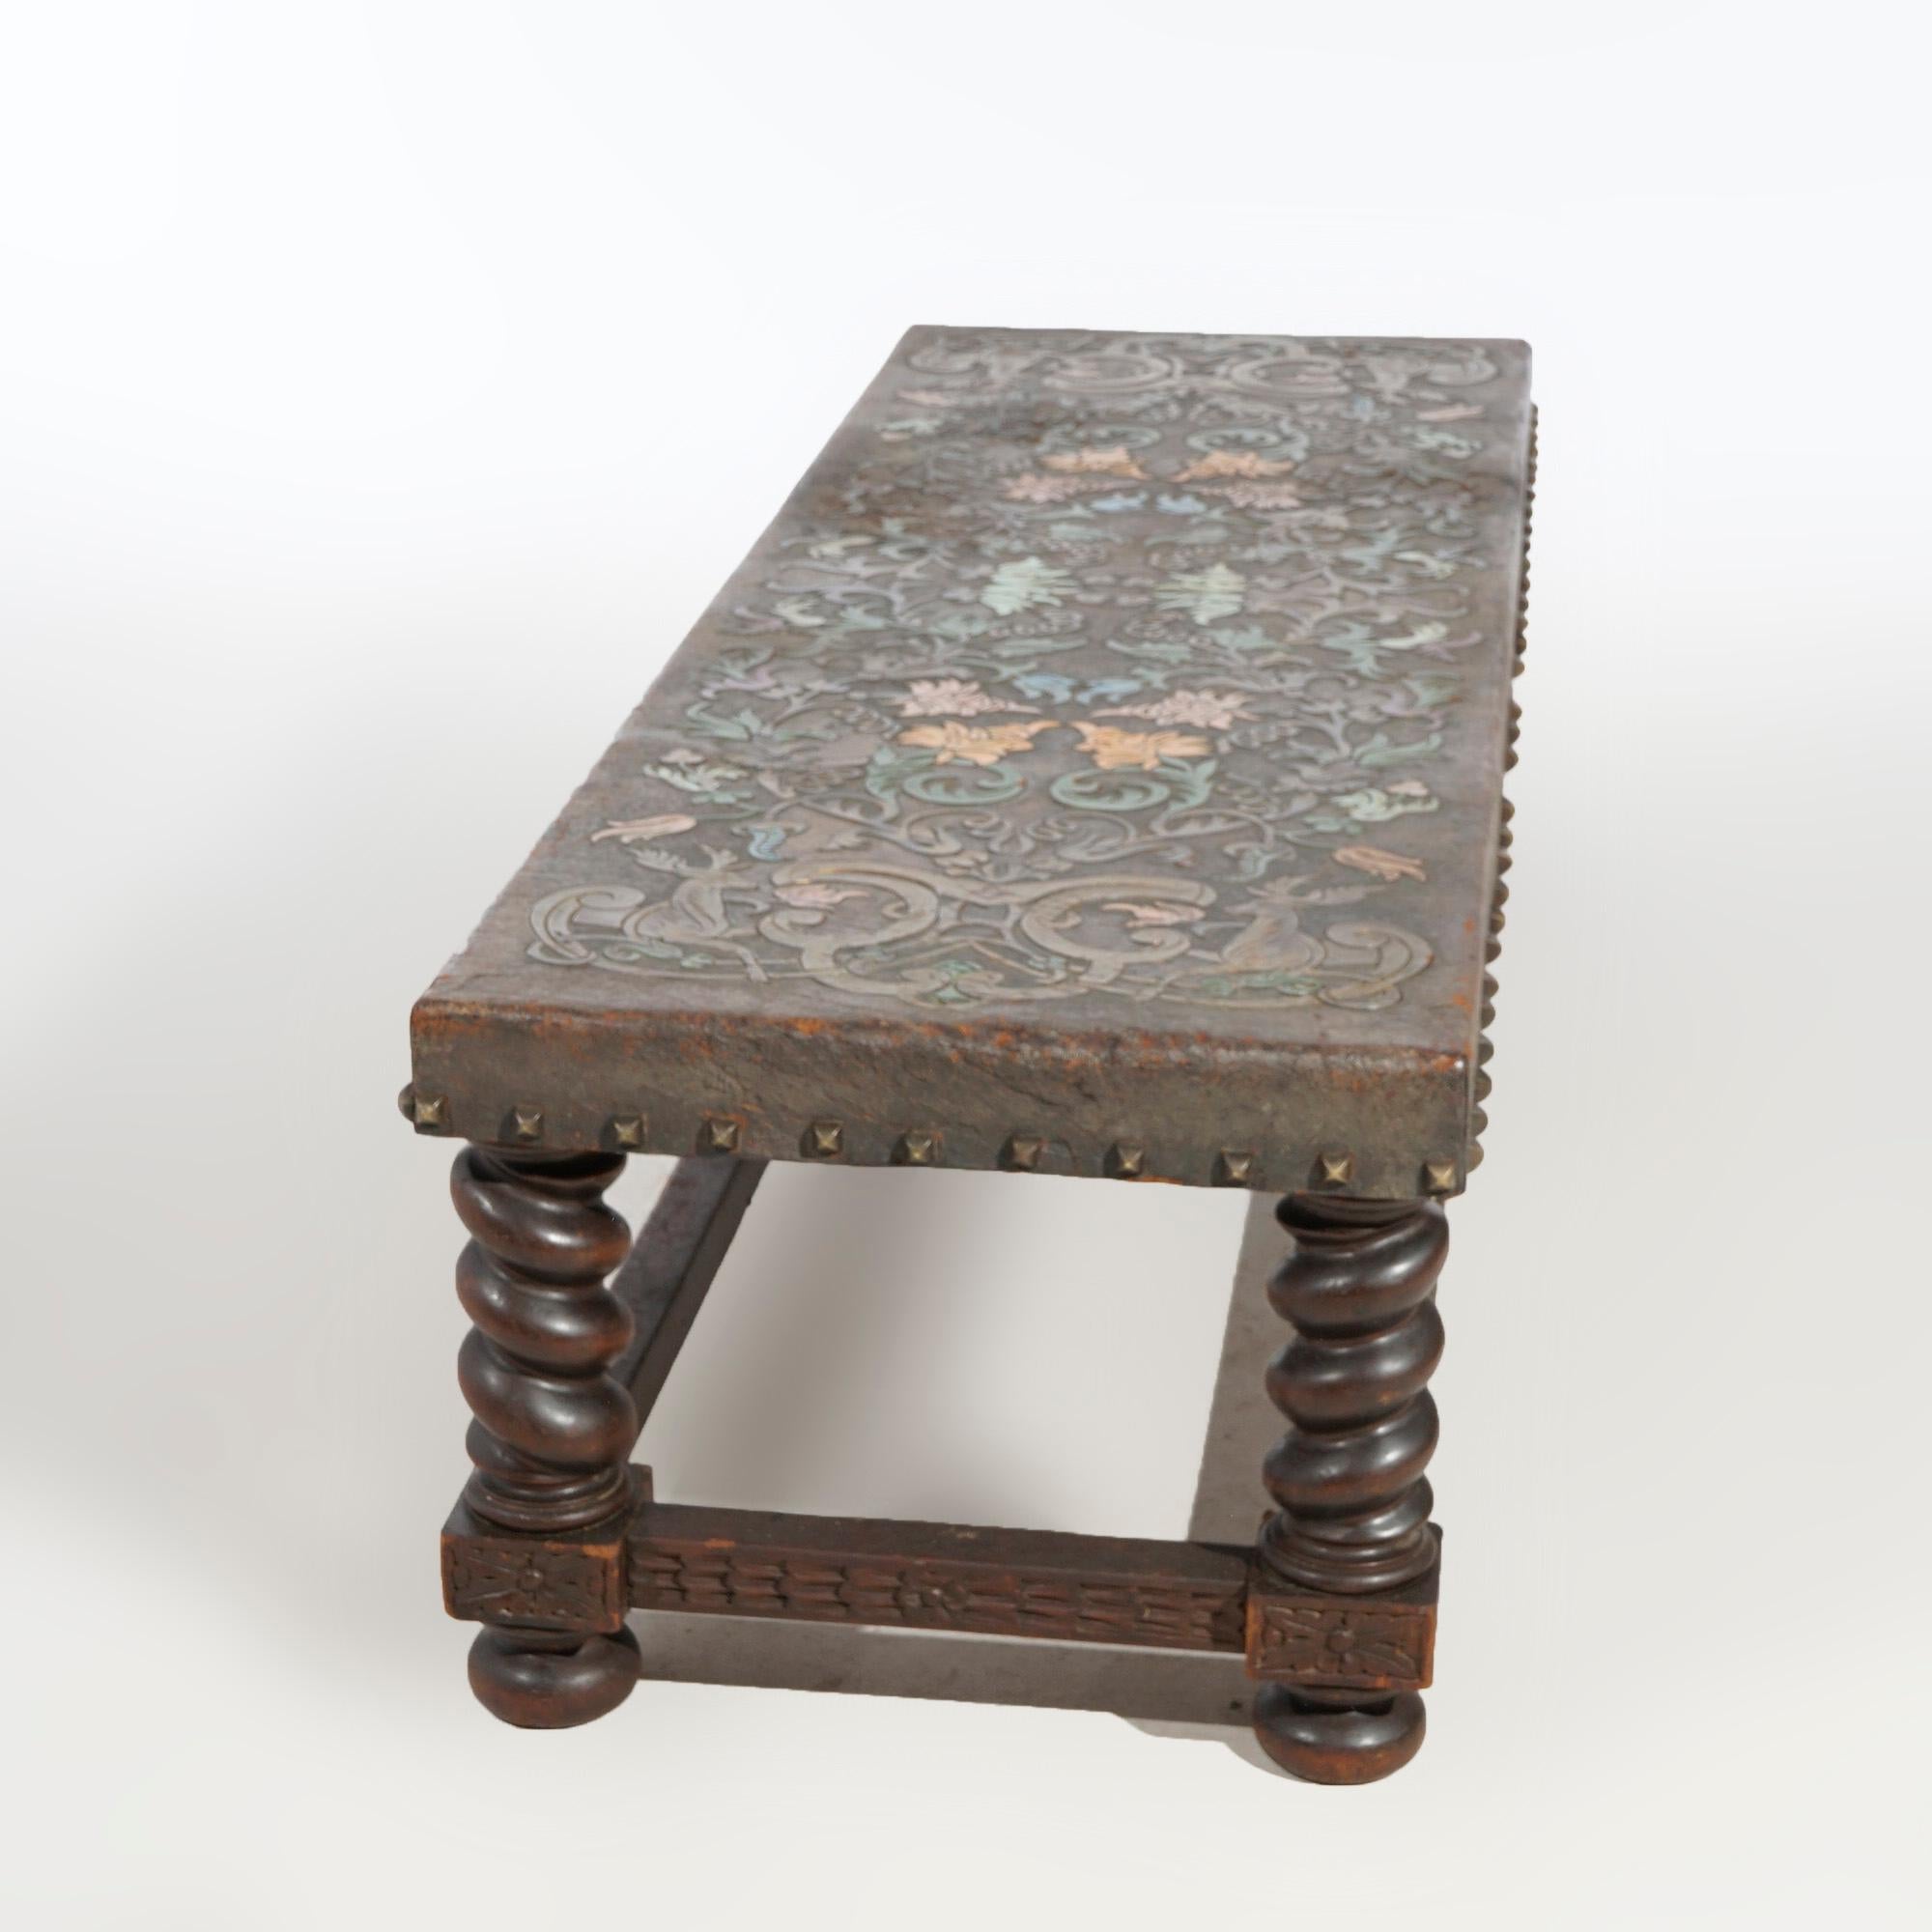 An antique English Elizabethan low bench offers tooled leather top with flower pattern over oak base having rope twist legs, c1910

Measures- 16.5'' H x 64'' W x 21.25'' D.

*Ask about DISCOUNTED DELIVERY rates within 1,500 miles of NY*
